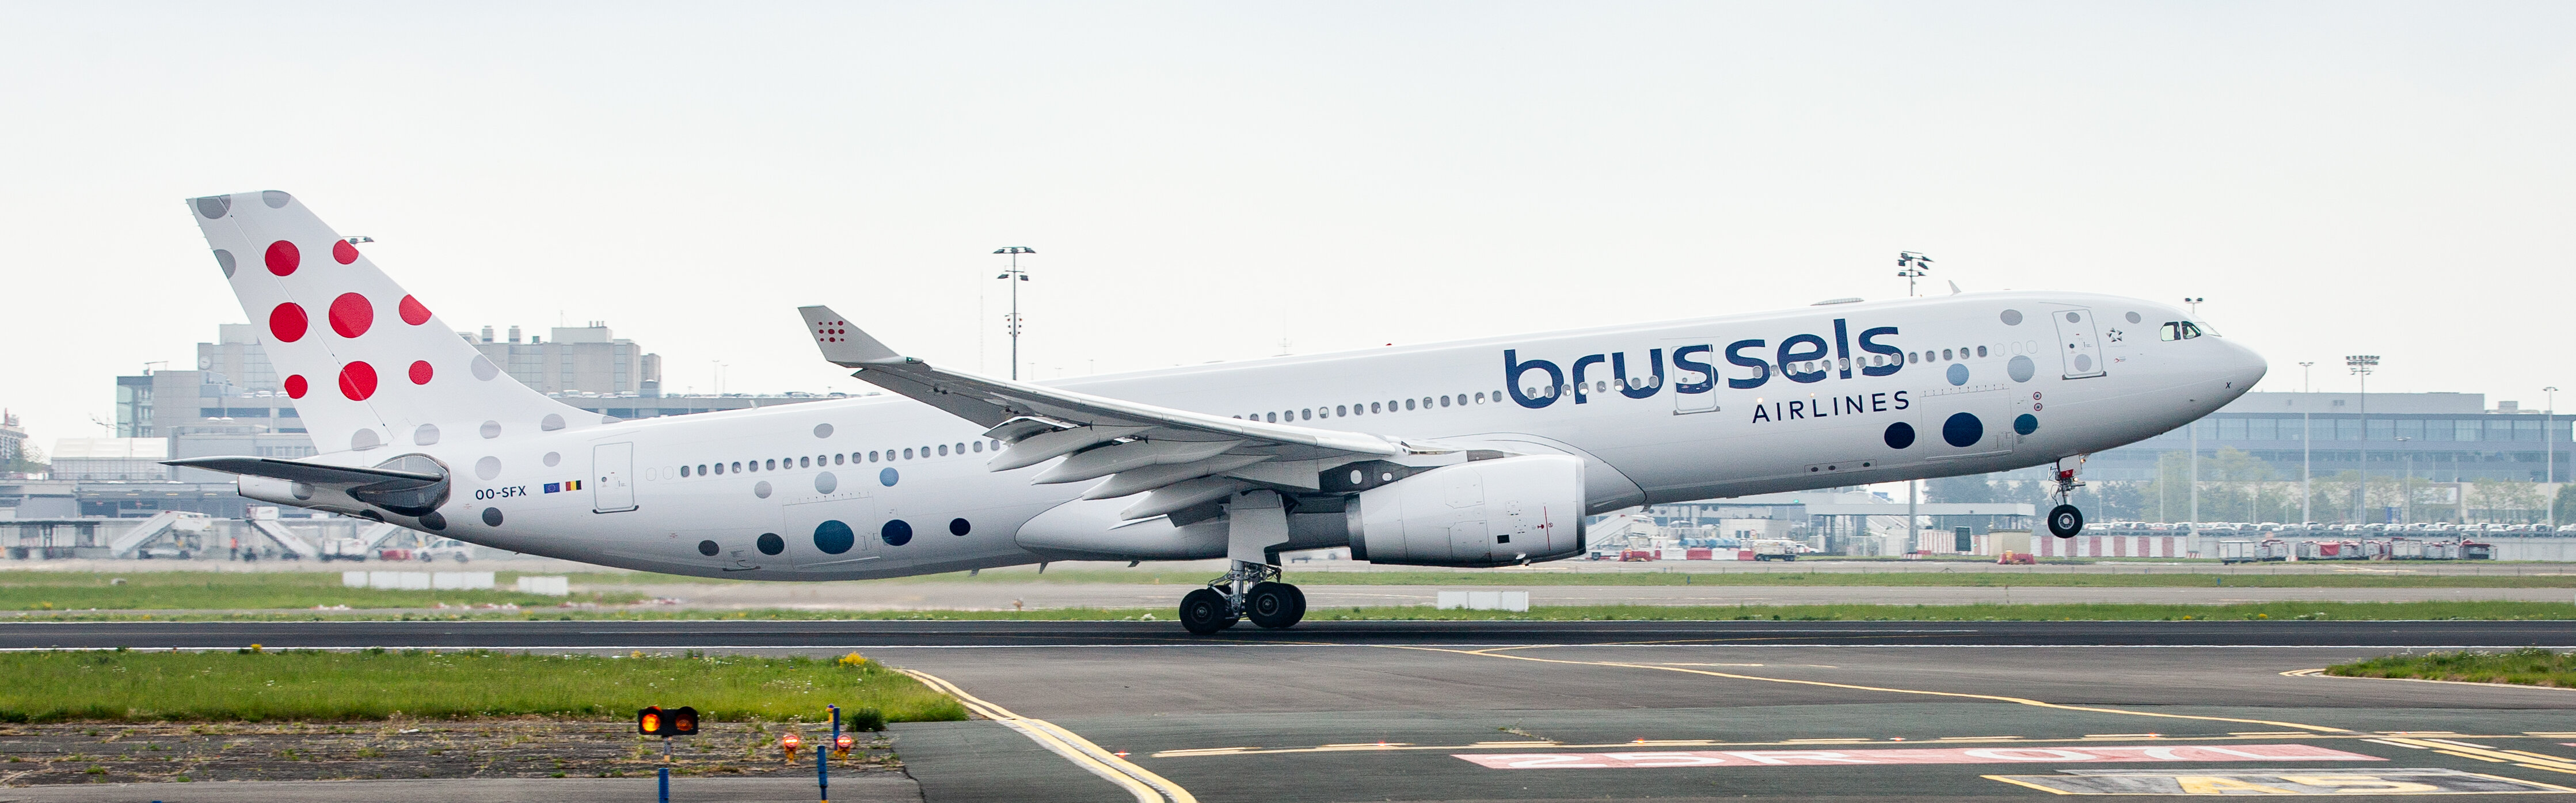 Brussels Airlines - Lufthansa Group